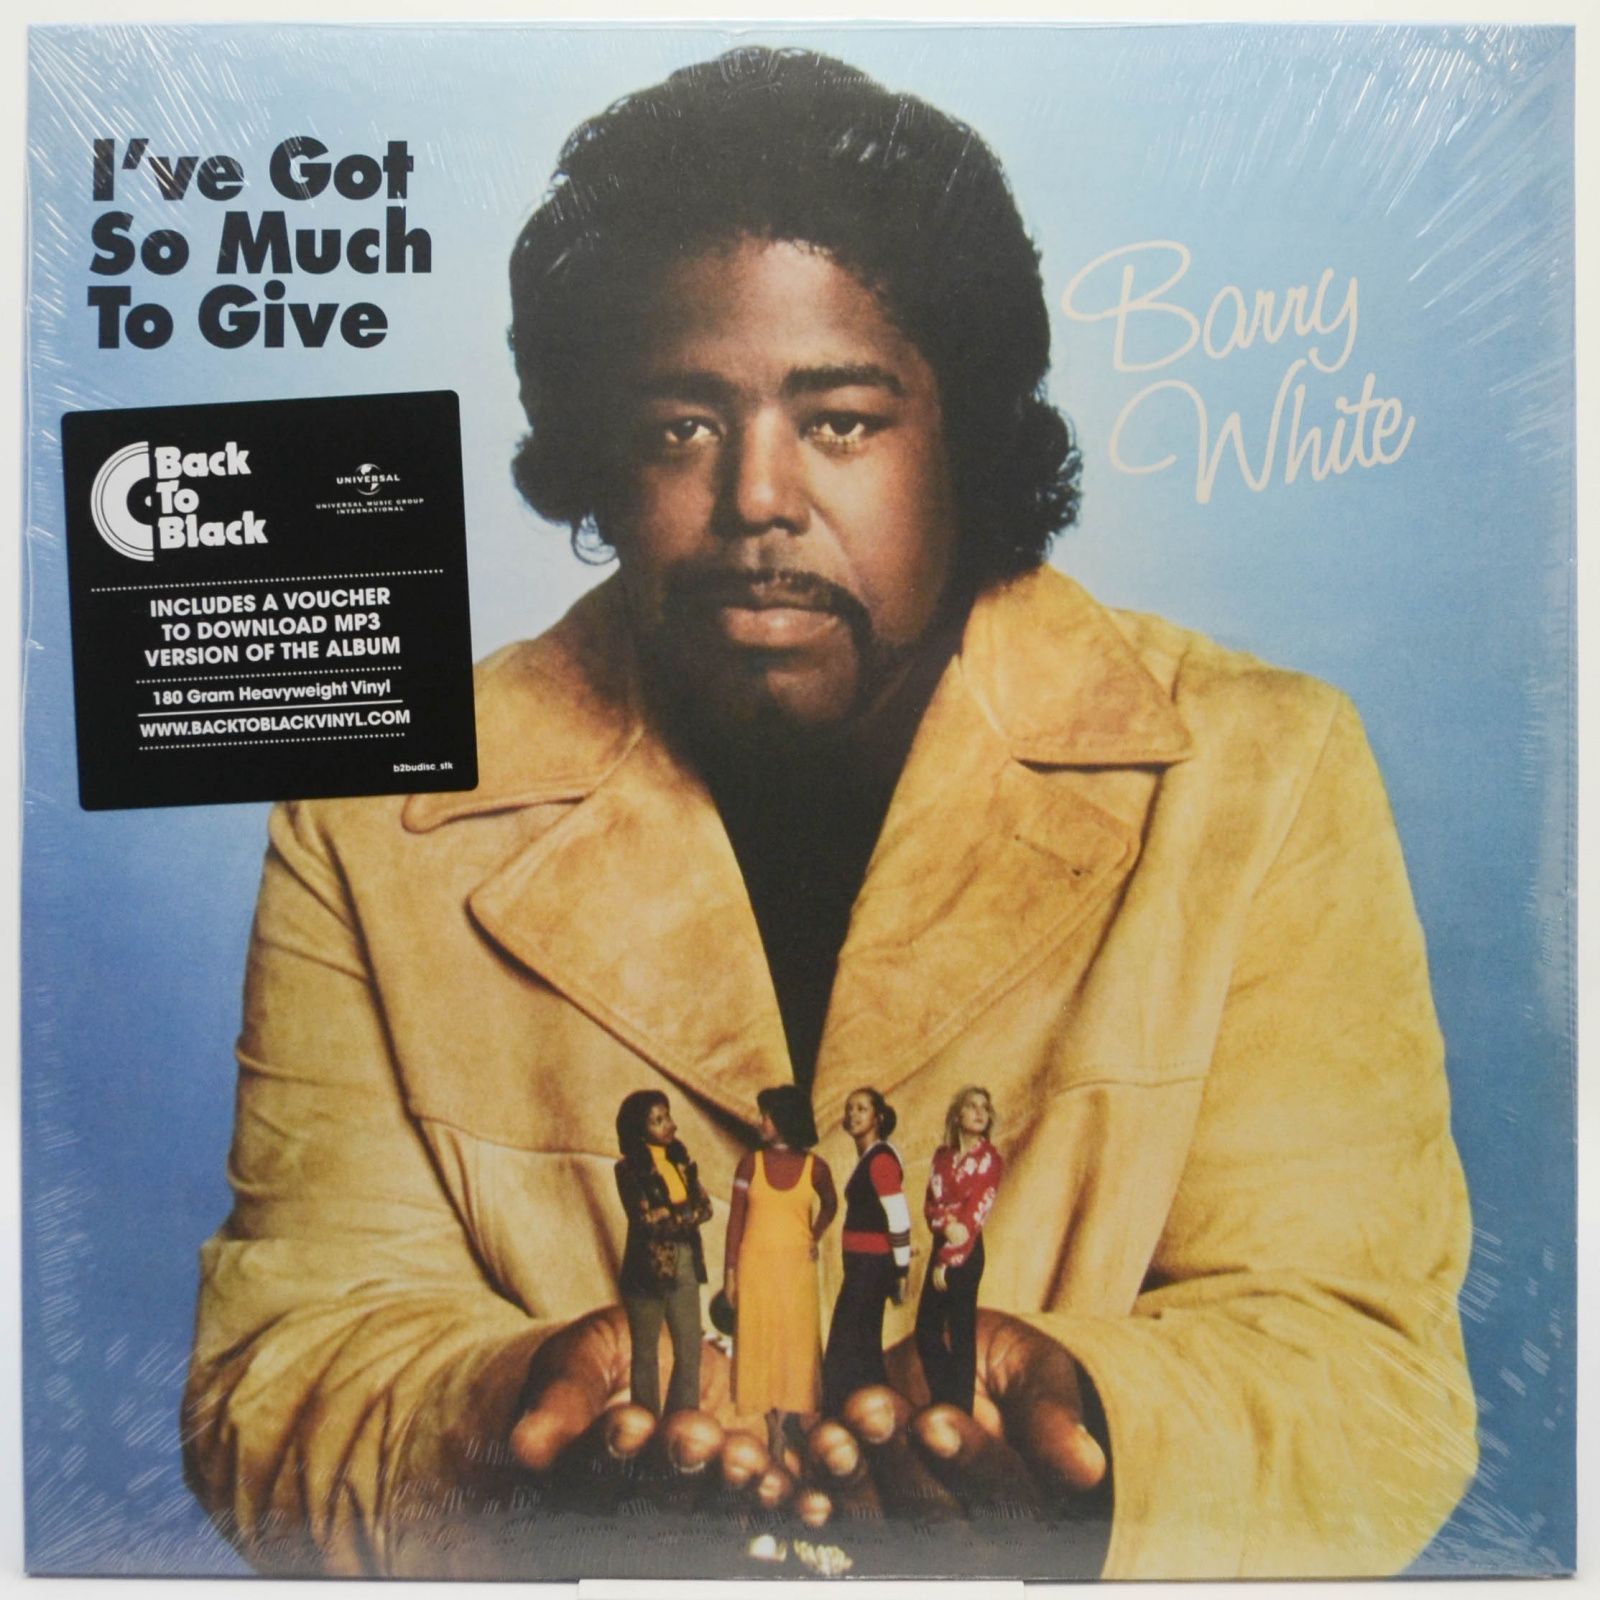 Barry White — I've Got So Much To Give, 2018